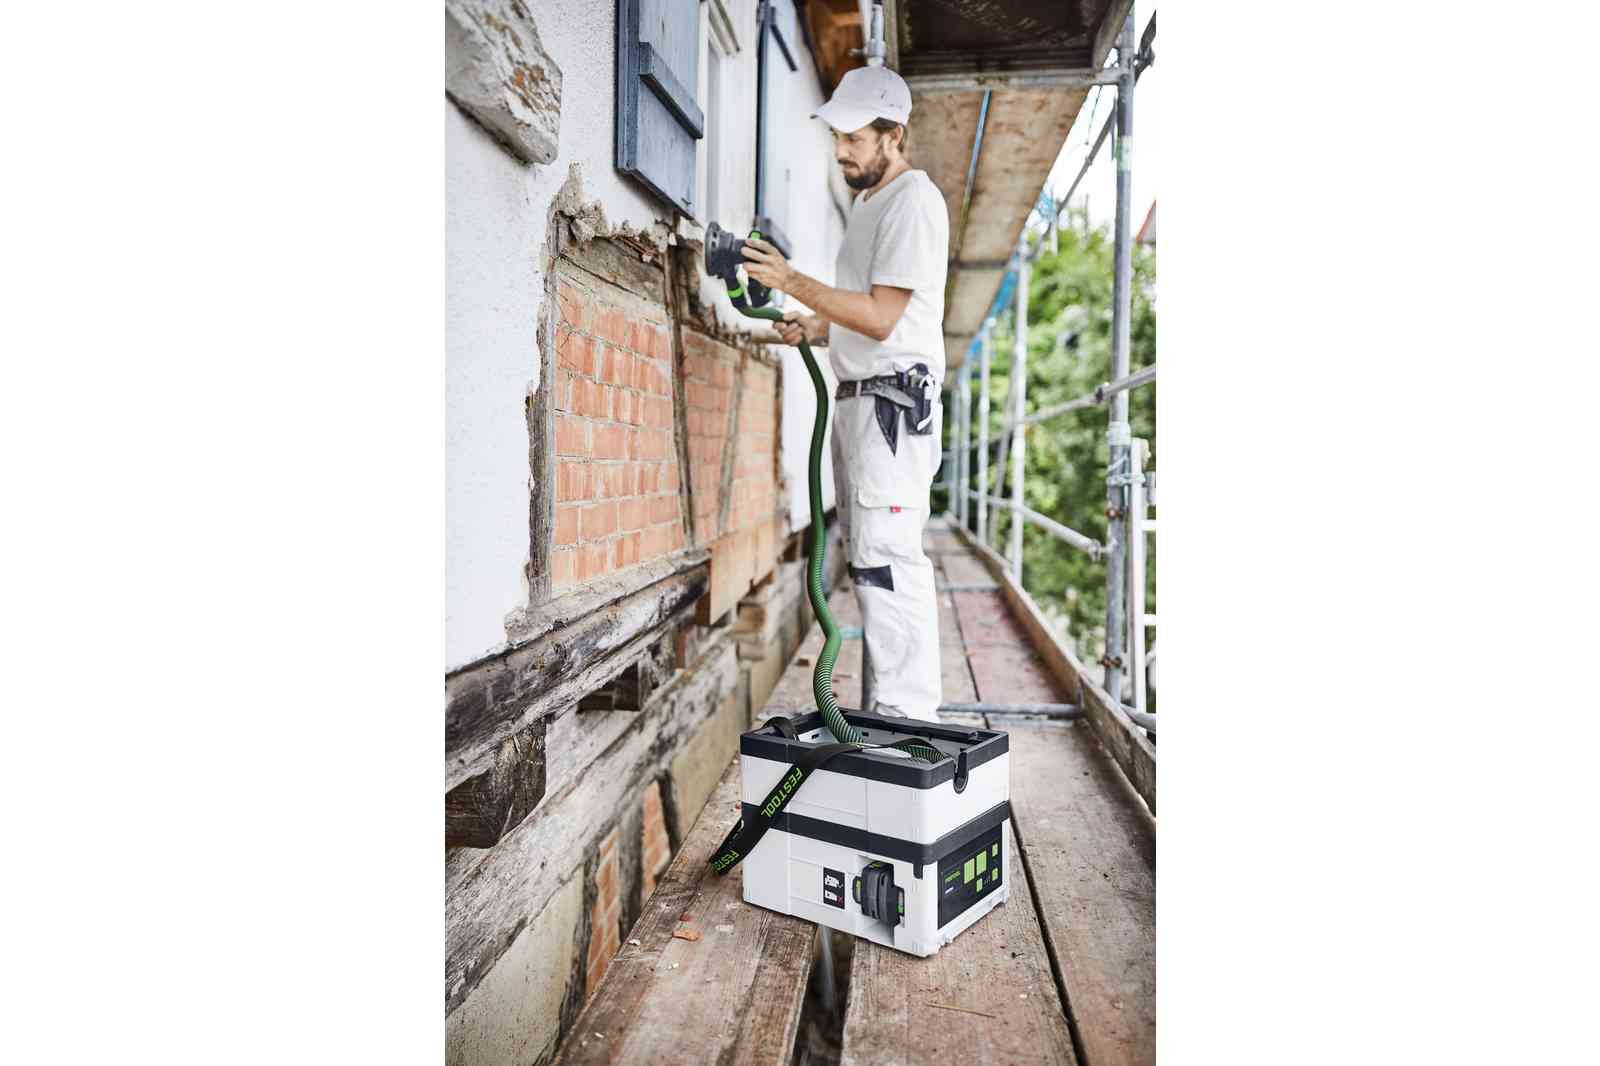 5L M 18V Class Cordless Mobile Dust Extractor + Vacuum CTMC SYS I-Basic 576933 By Festool